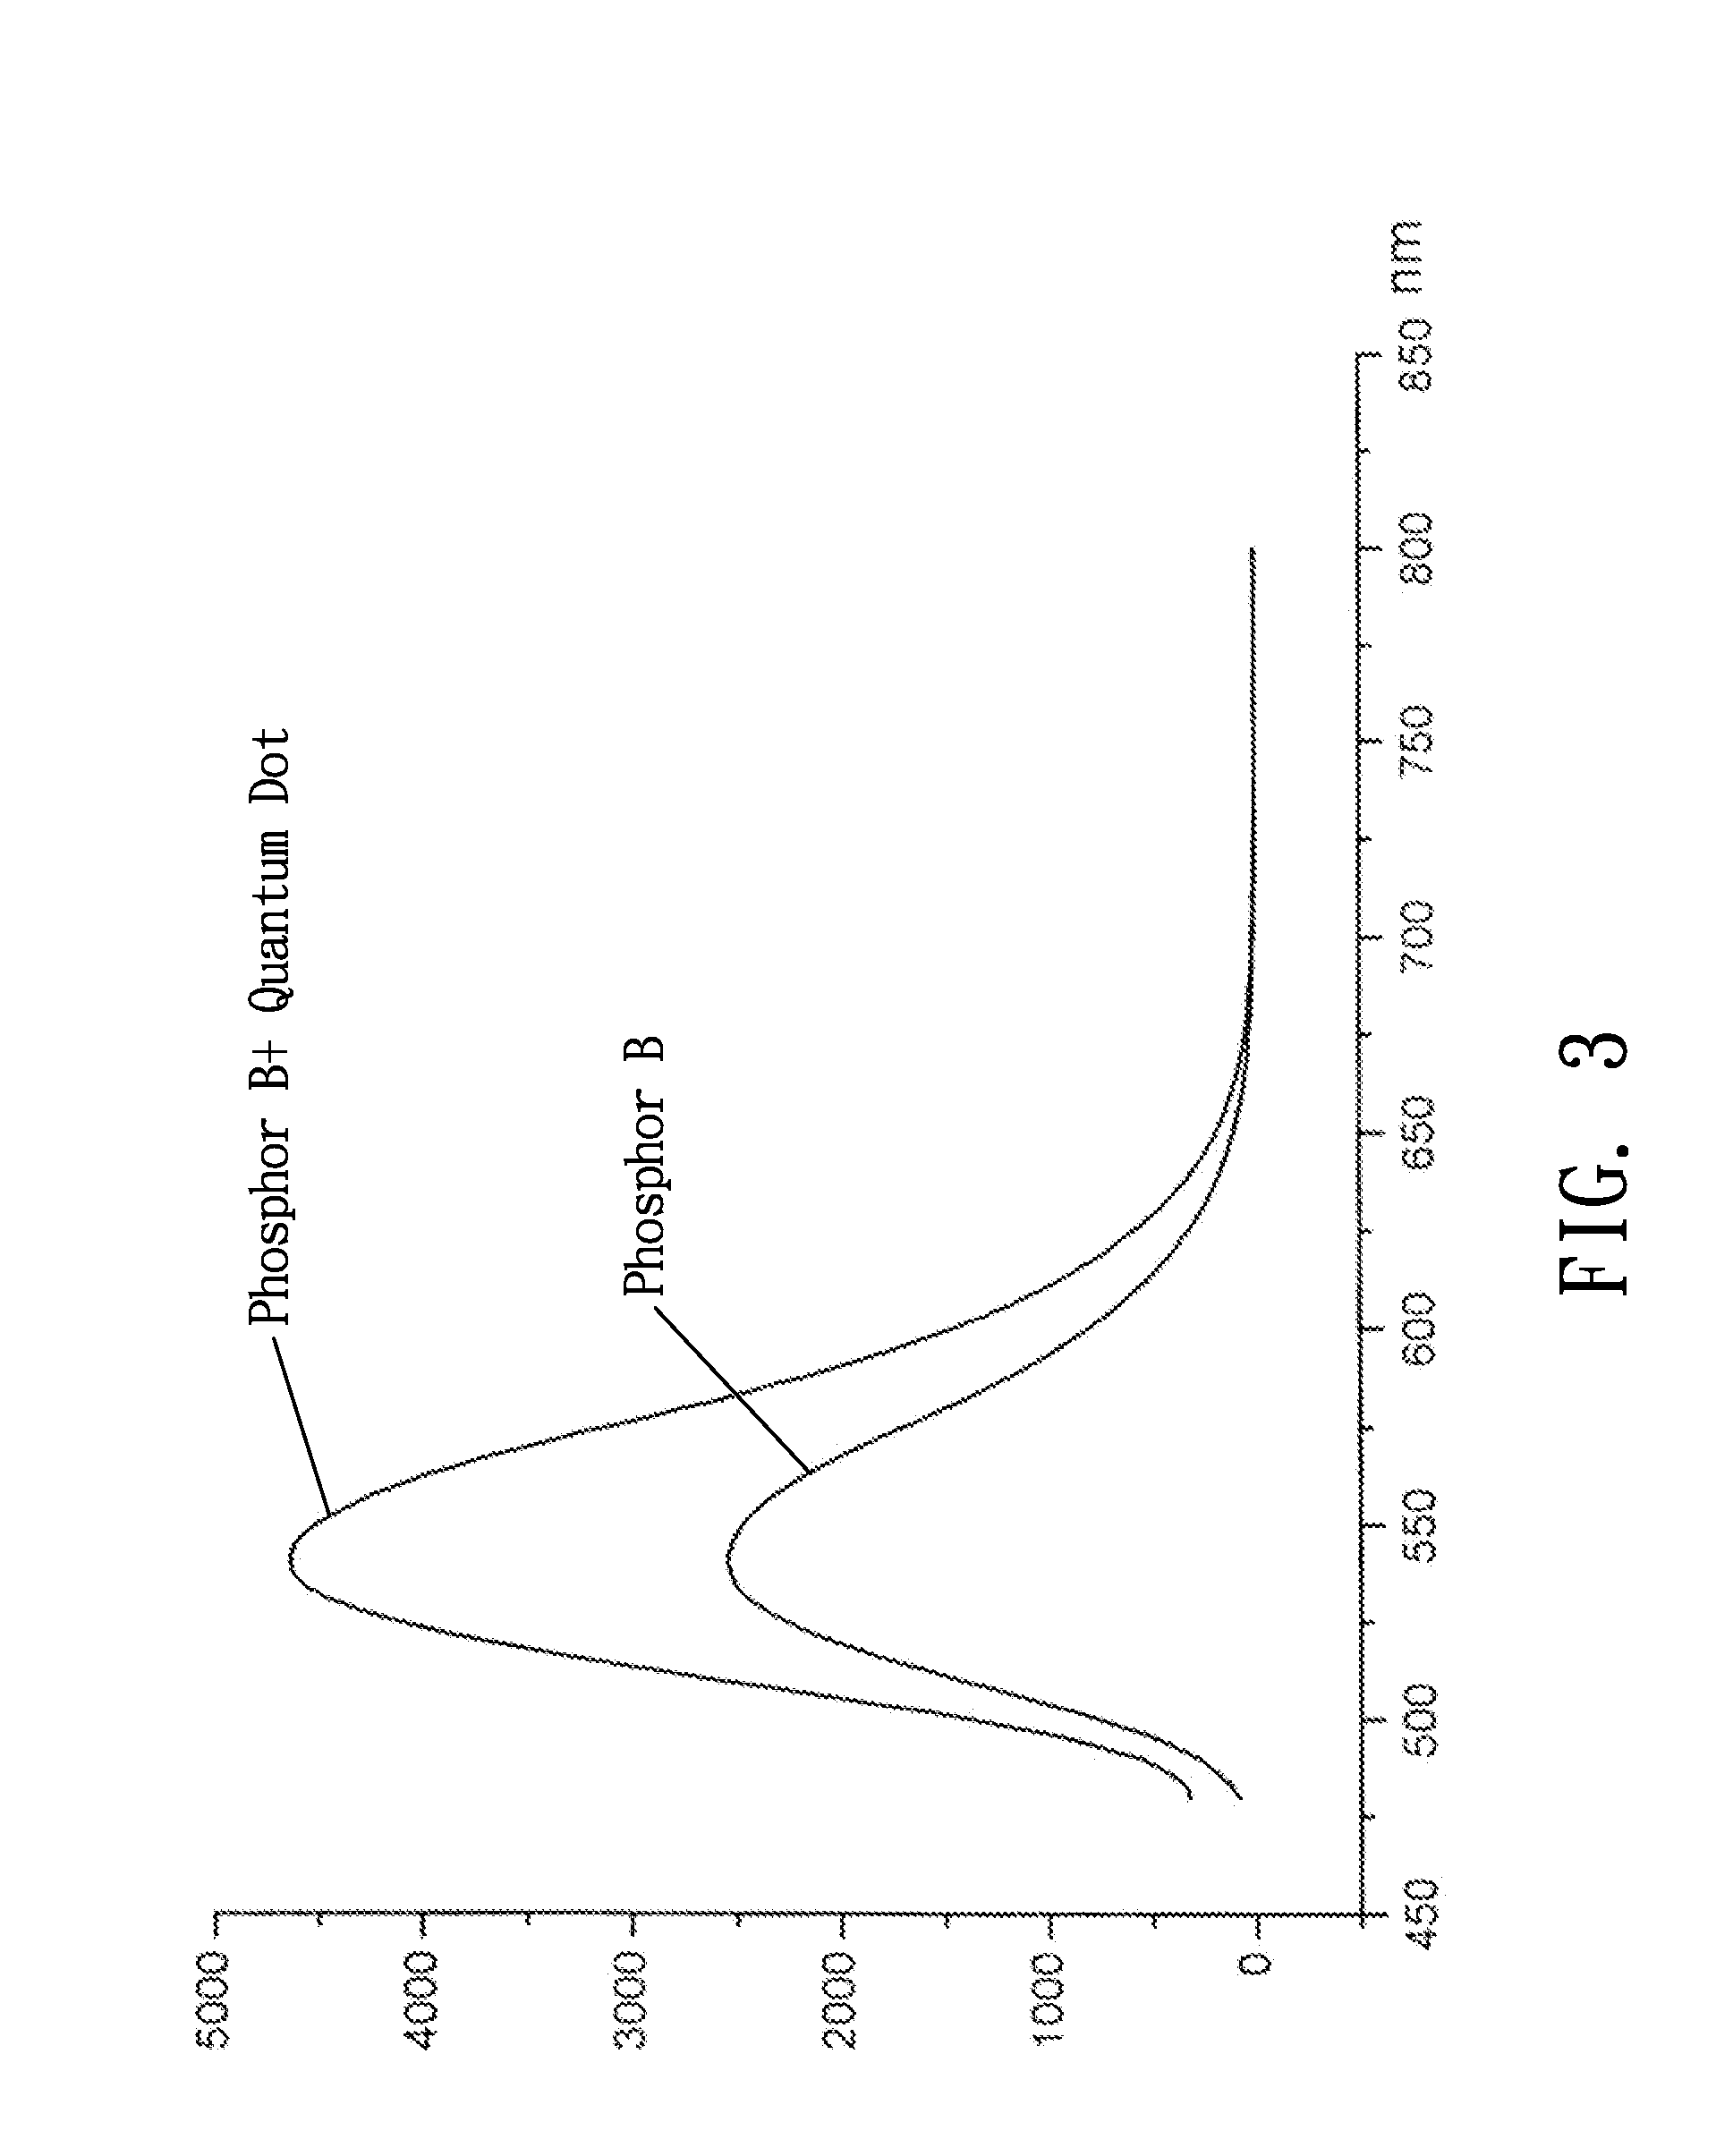 Compound Material for Inorganic Phosphor and White LED